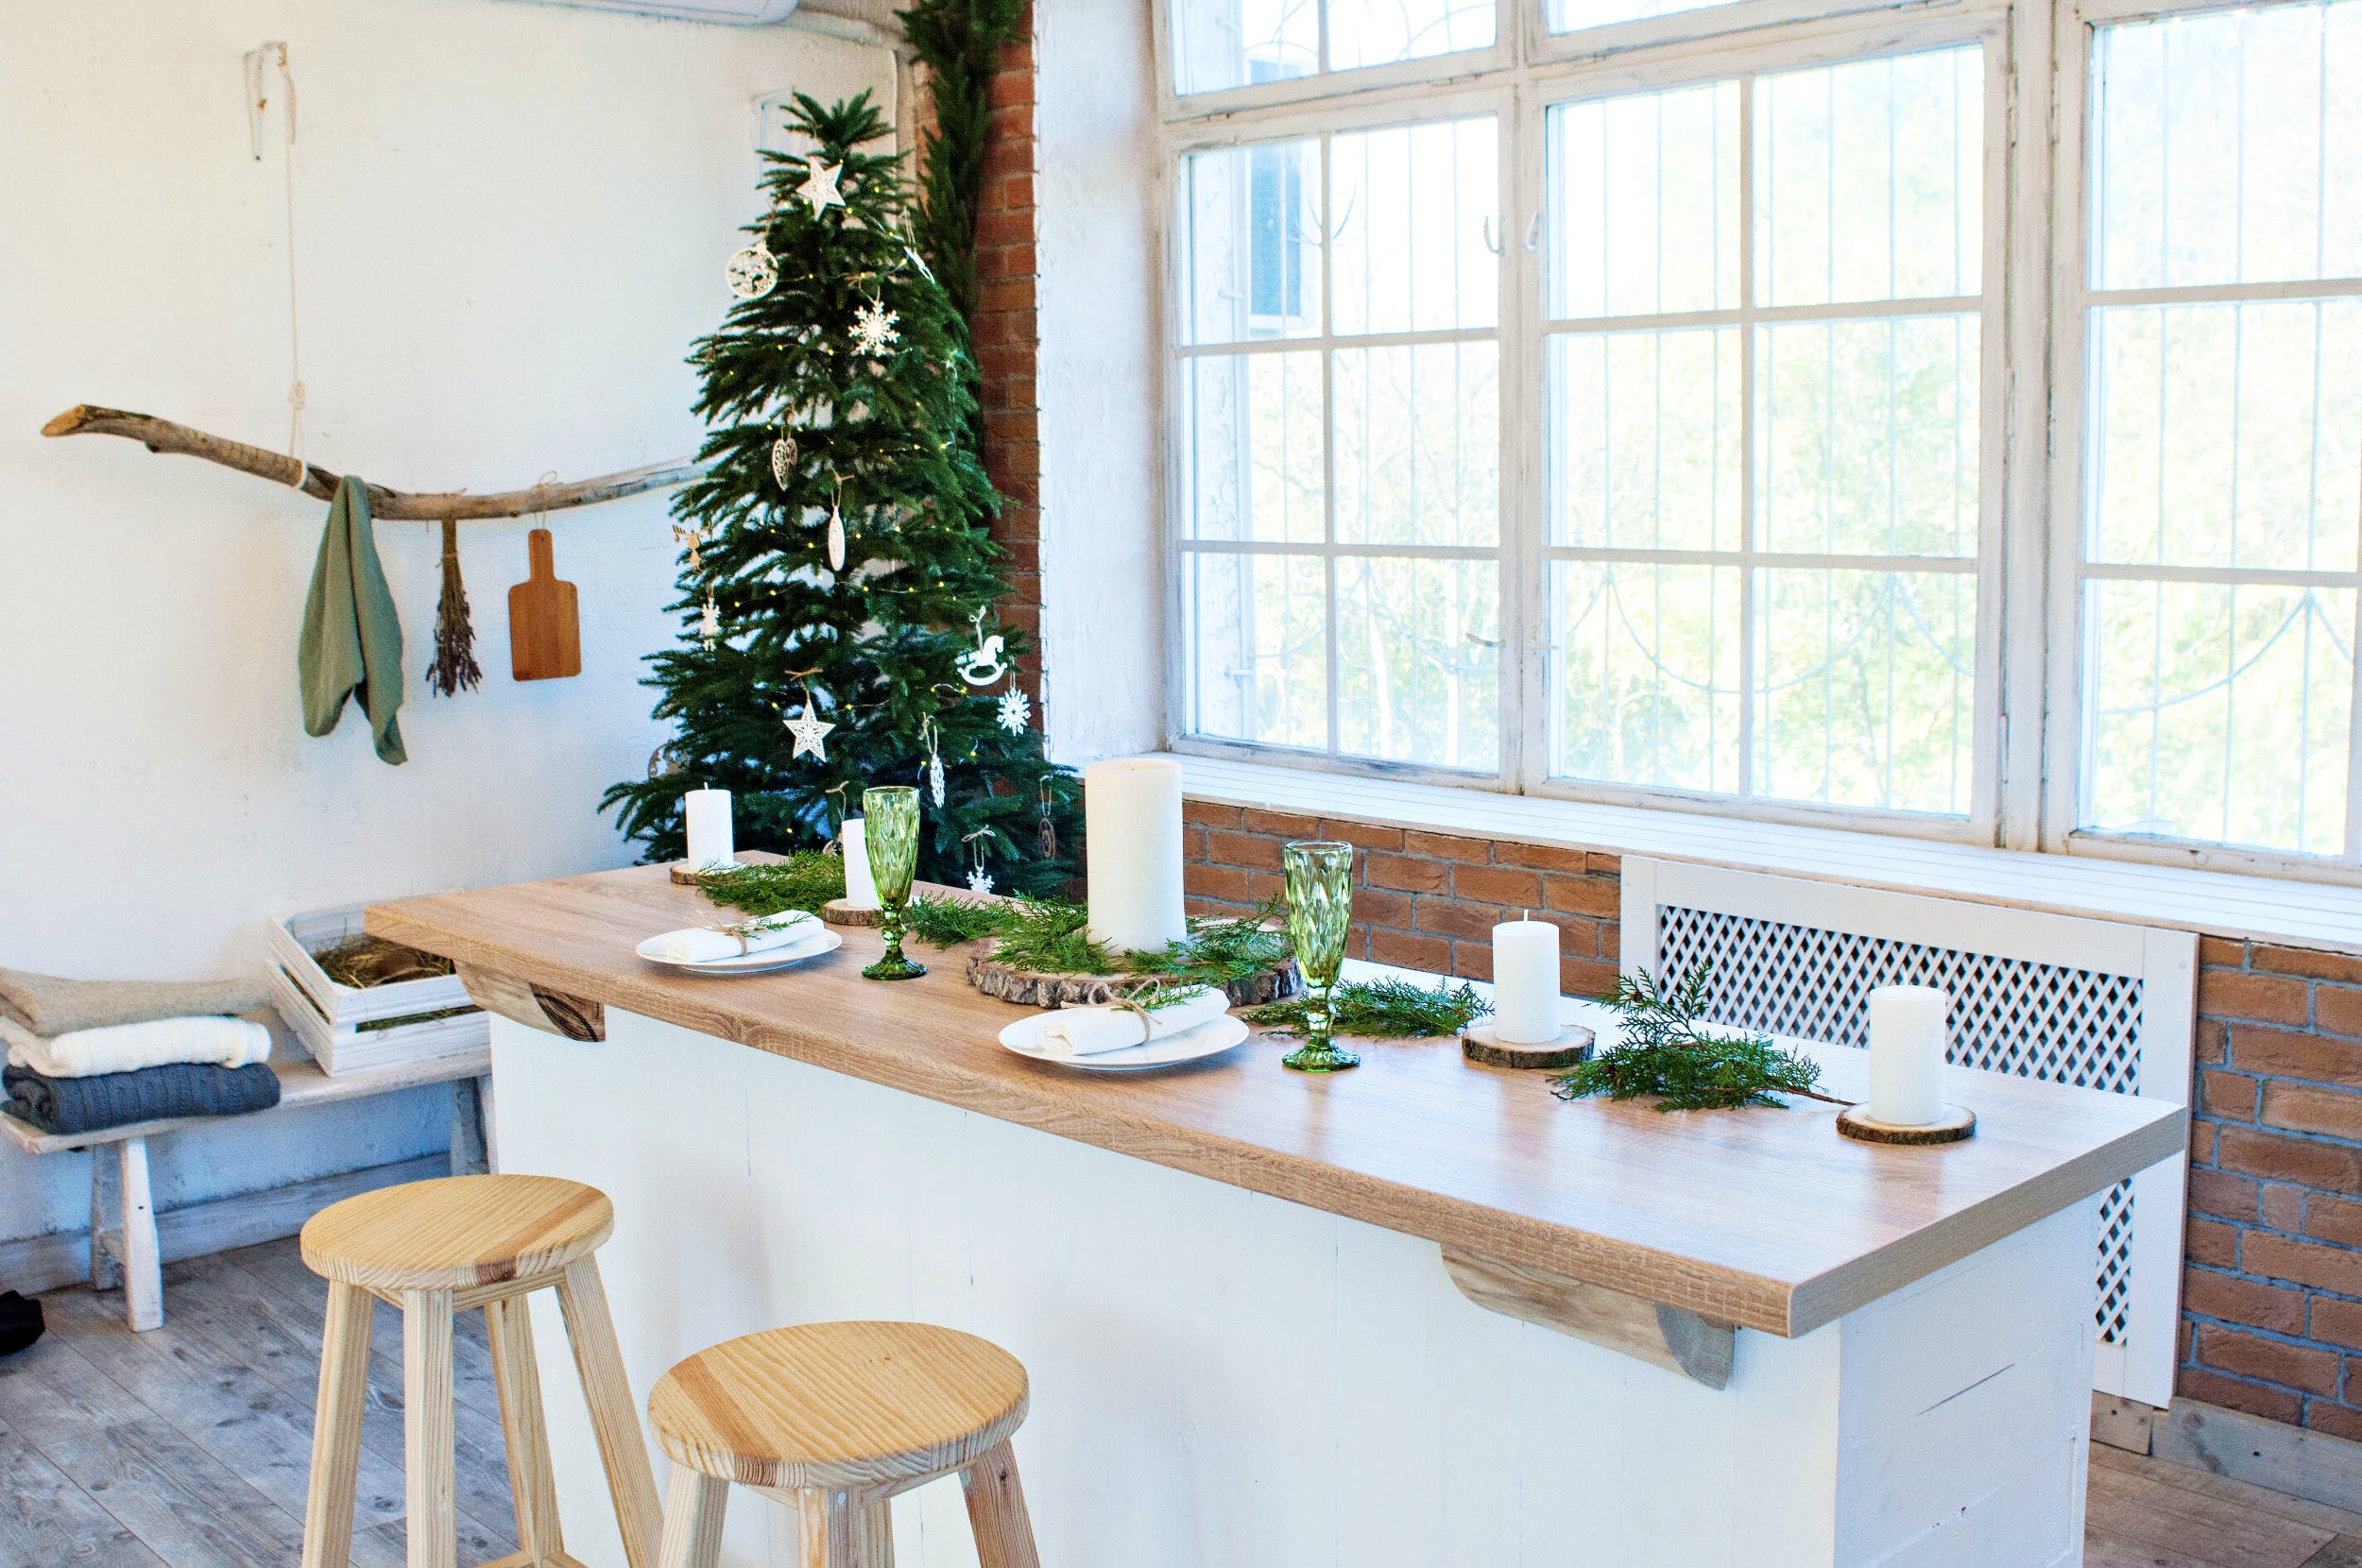 Image of navidad 1 2 in {{The most creative Christmas decoration ideas for your kitchen}} - Cosentino